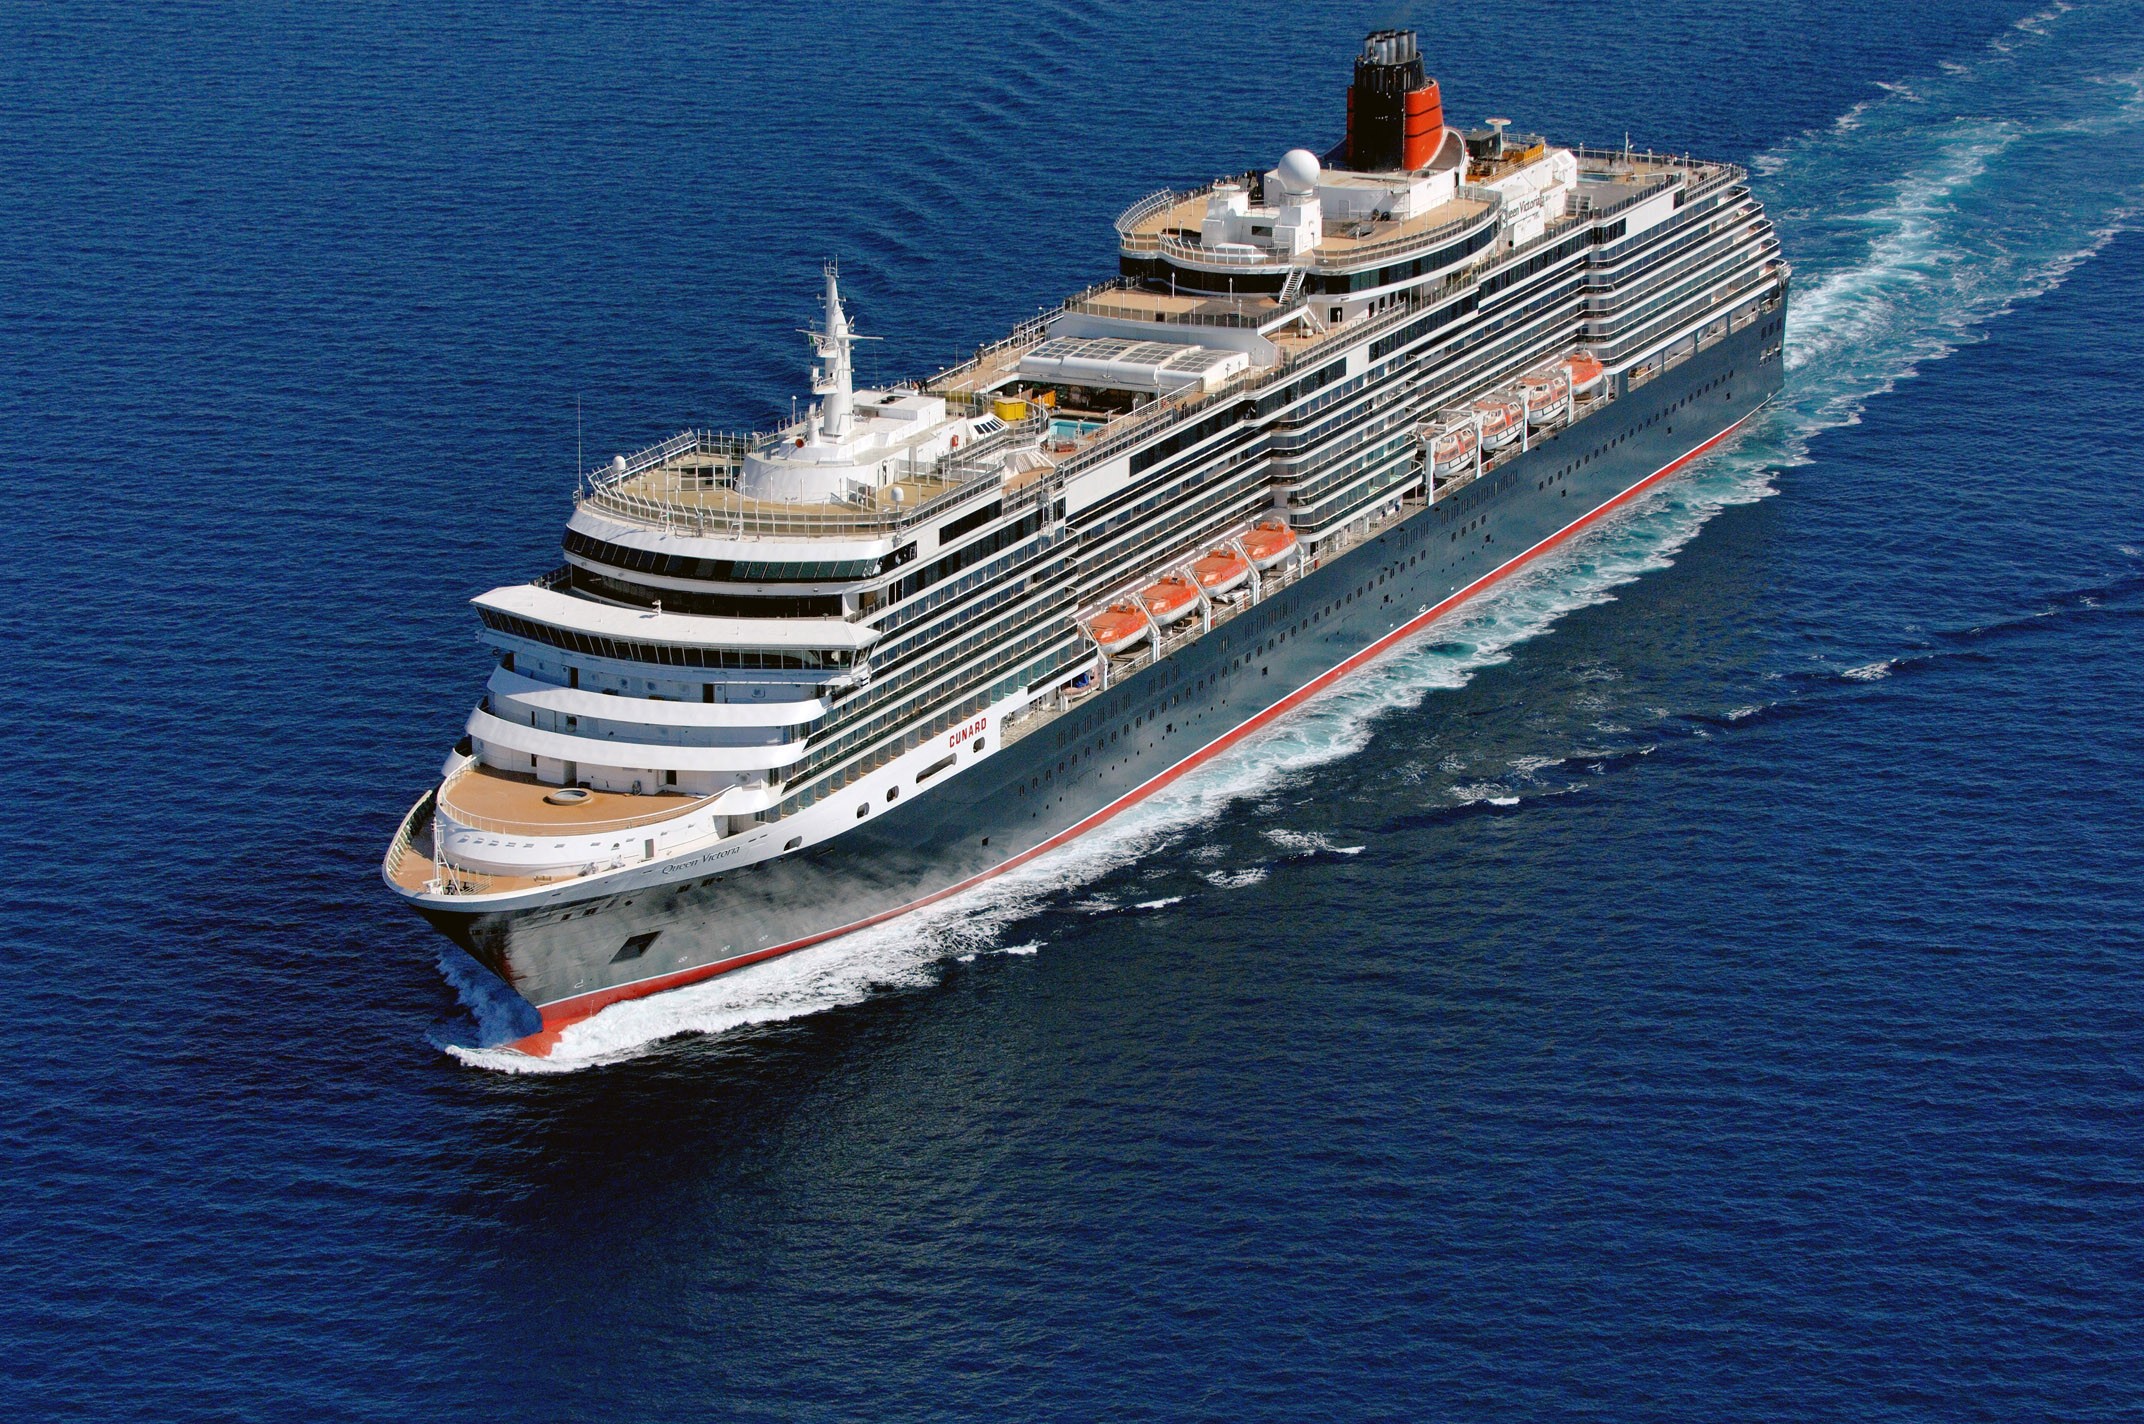 The Queen Victoria passenger liner ship. Italy's state-owned shipbuilder Fincantieri built the new 90,000 ton vessel for Cunard Line, a unit of Carnival Corp. Fincantieri and Carnival are working with China State Shipbuilding Corporation to build China’s first luxury cruise ship. Photo: AP